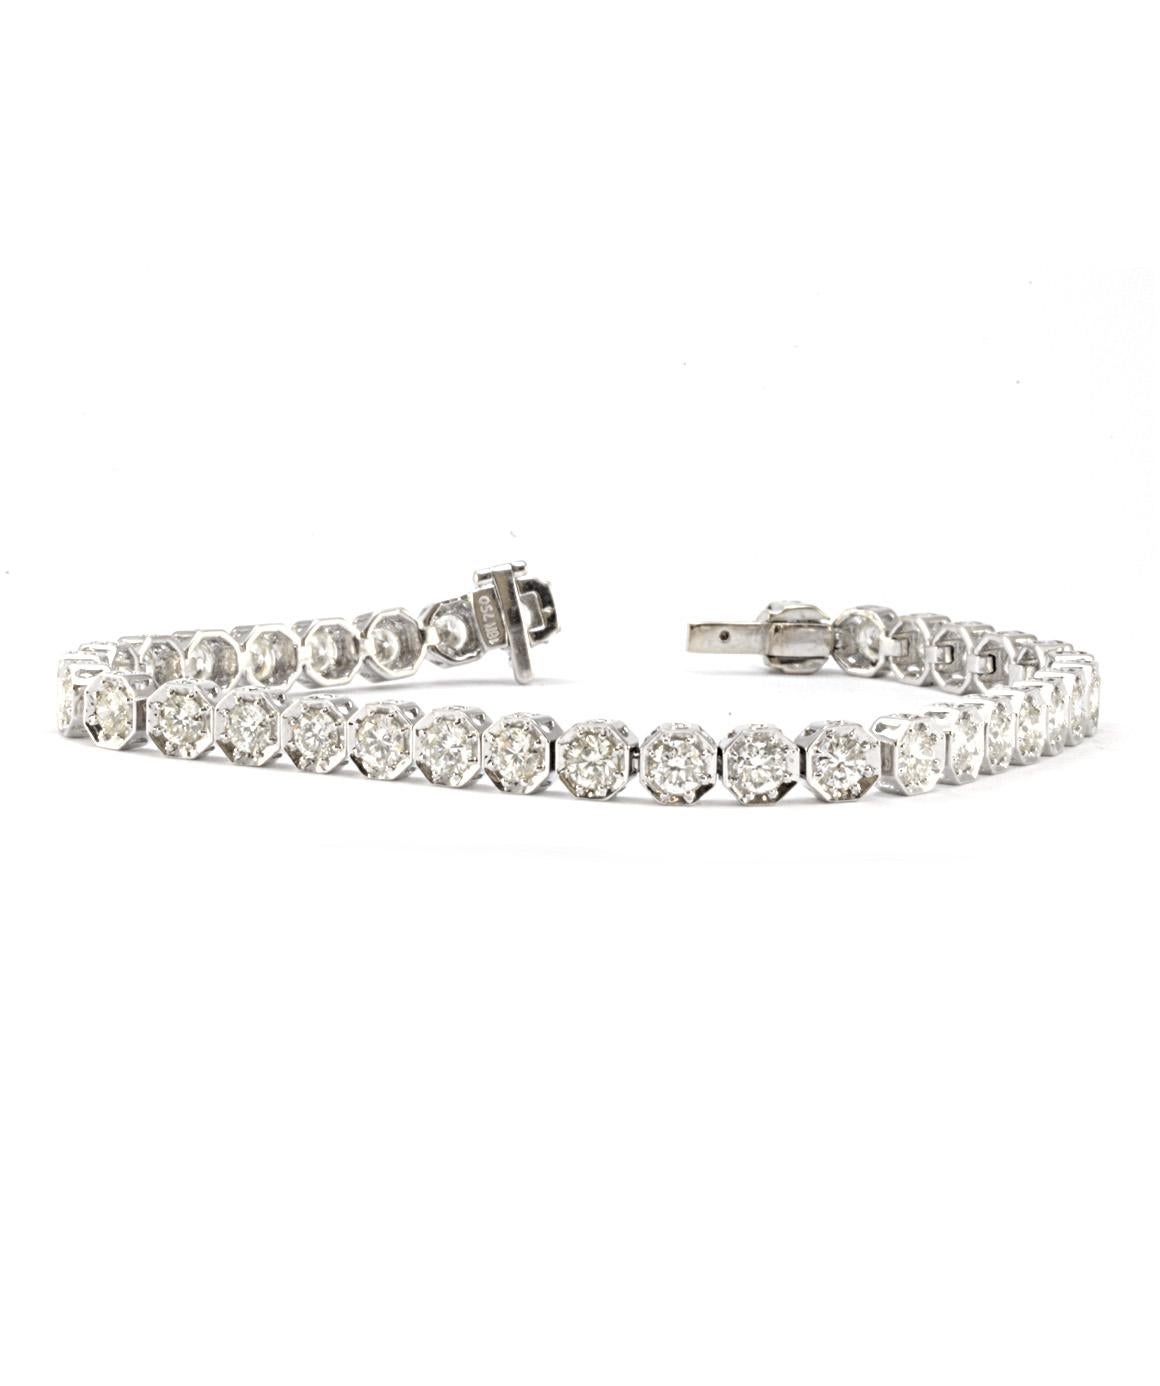 This solid 18k white gold diamond tennis bracelet is in excellent condition! There are 35 diamonds weighing 3.50CTTW I/SI approximately. Each diamond is set in a octagon shape setting. The bracelet measures 7 inches and weighs 15.1 grams